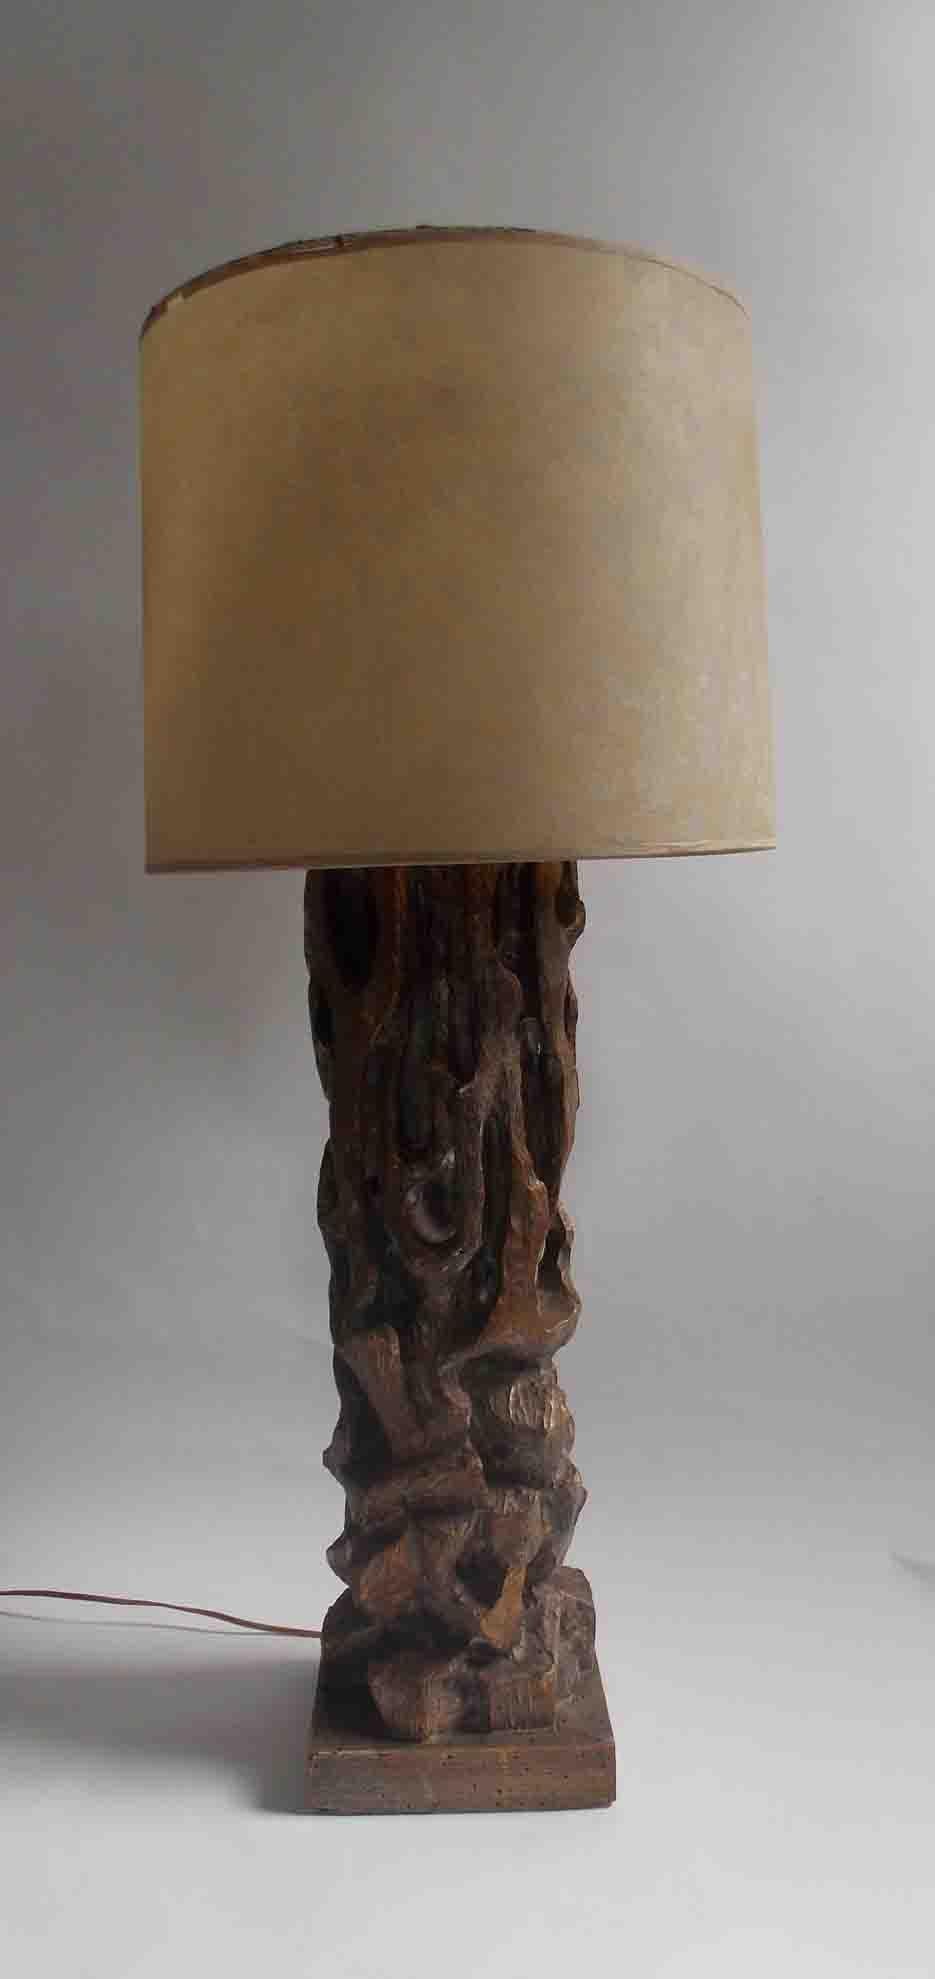 Large scale table lamp.
Carved and gilt surface.
Period shade.